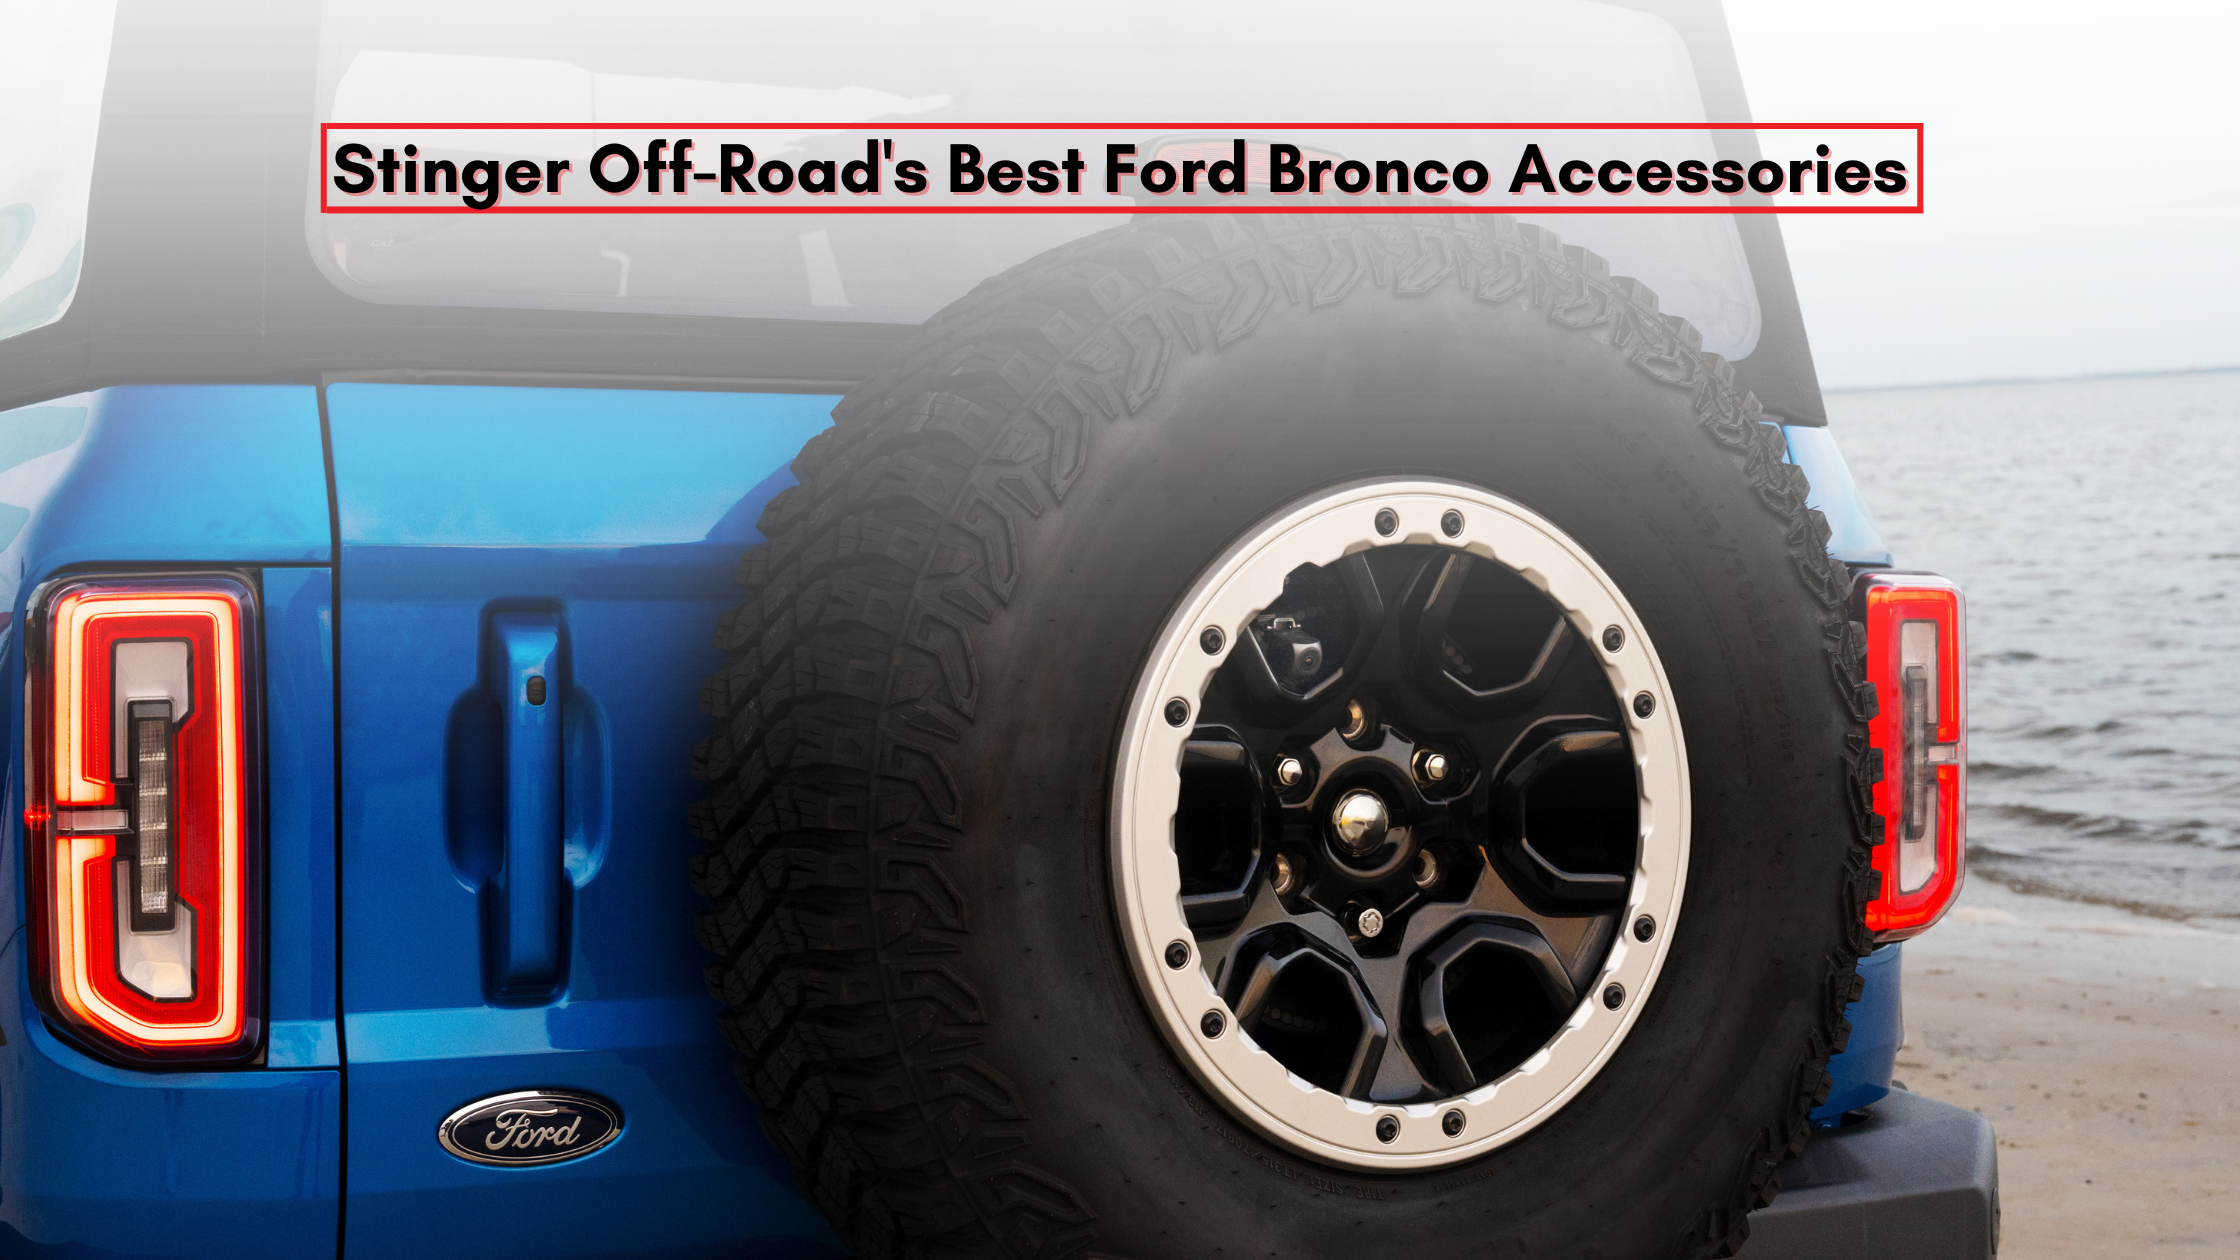 Stinger Off-Road's Best Ford Bronco Accessories